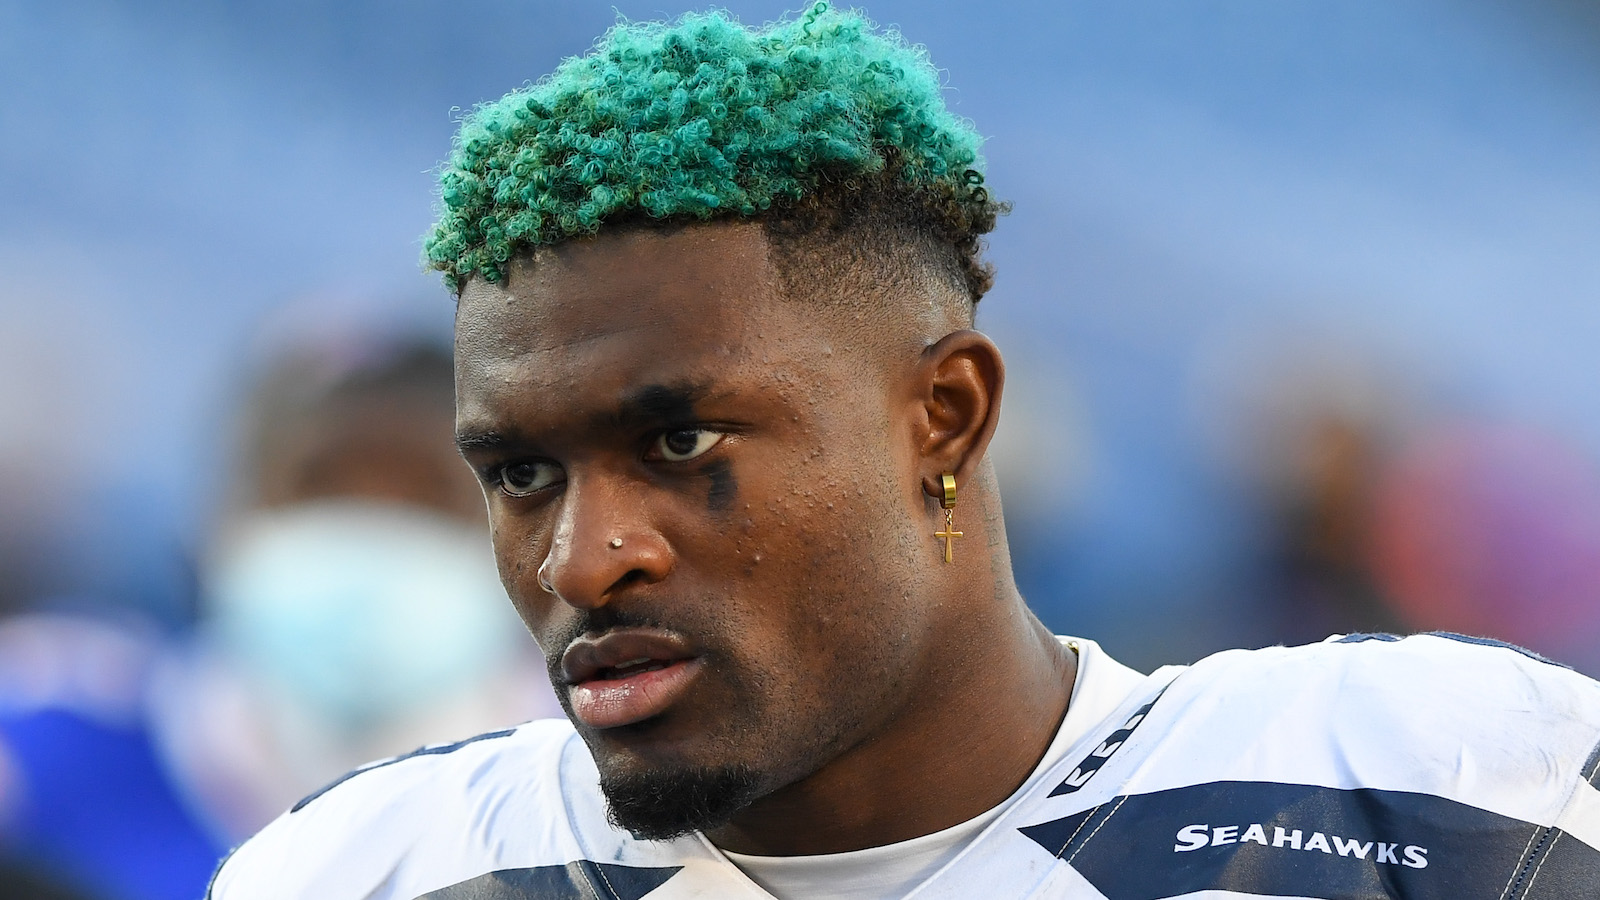 Seahawks GM zinged DK Metcalf over All-Star Game appearance